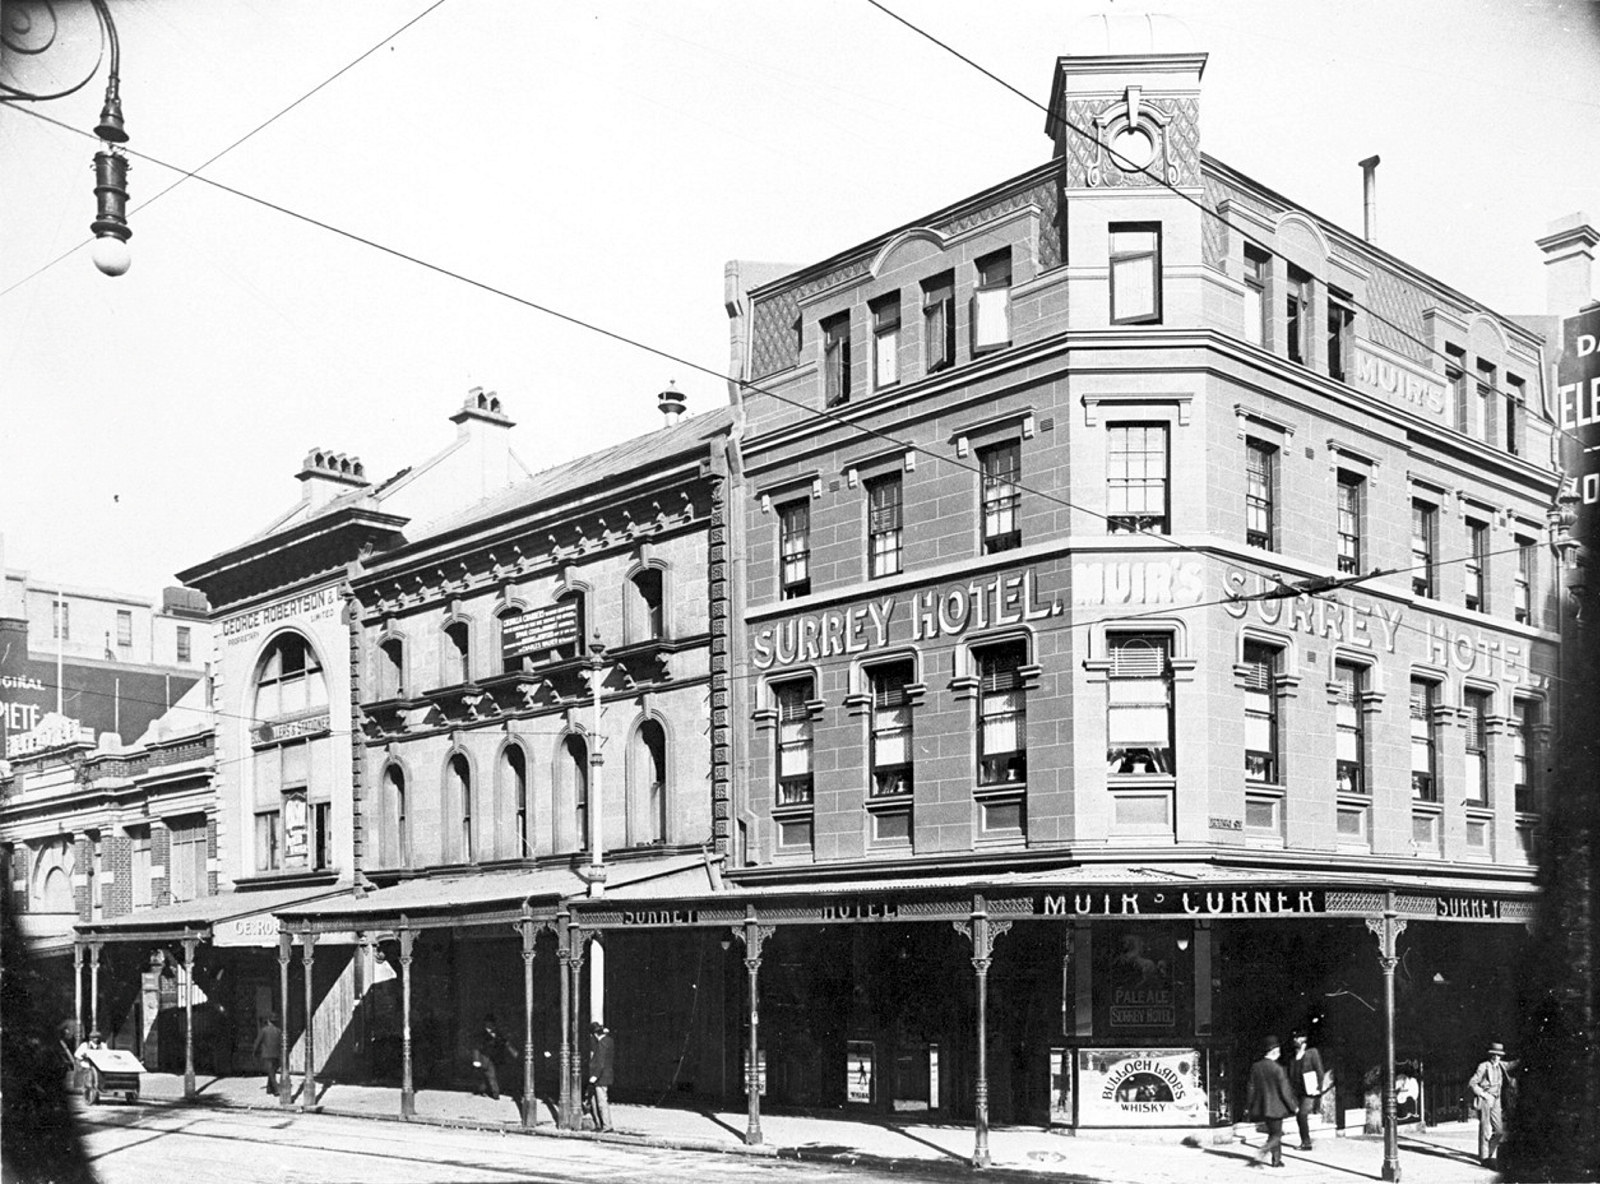 Exterior image of street showing four storey Victorian style building on a corner.